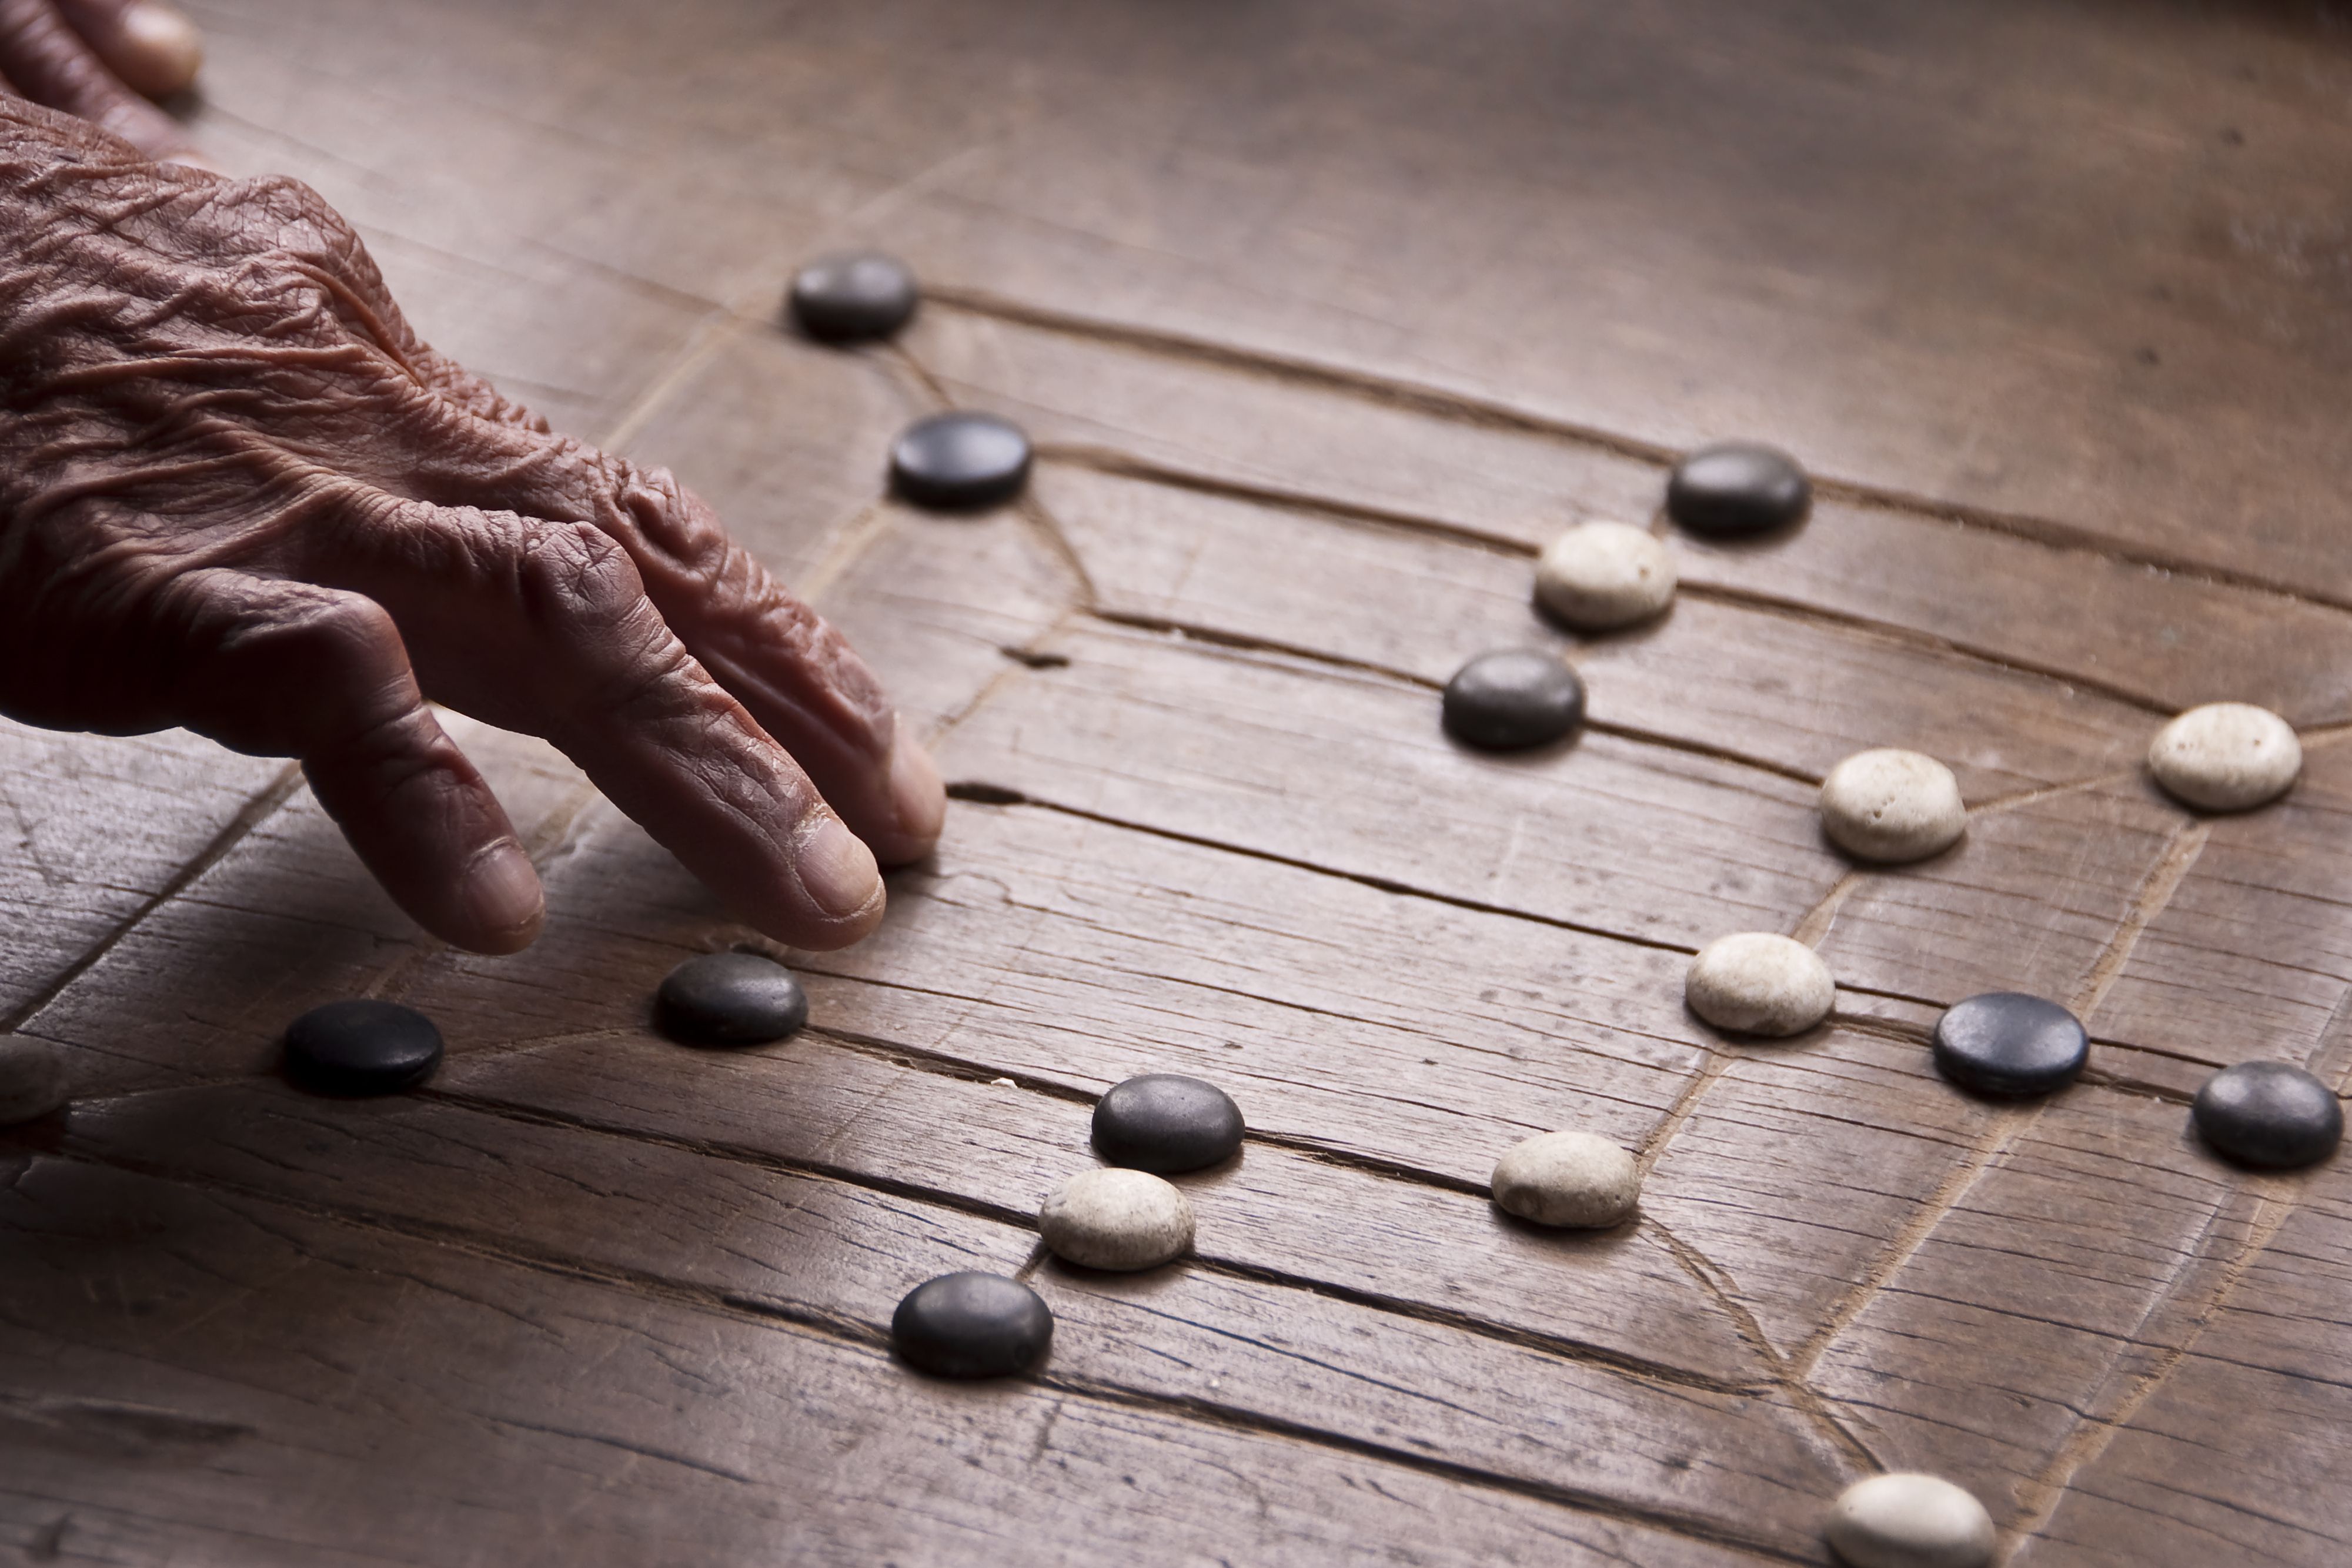 An old man’s hand reaches towards a worn morris board to move a piece.